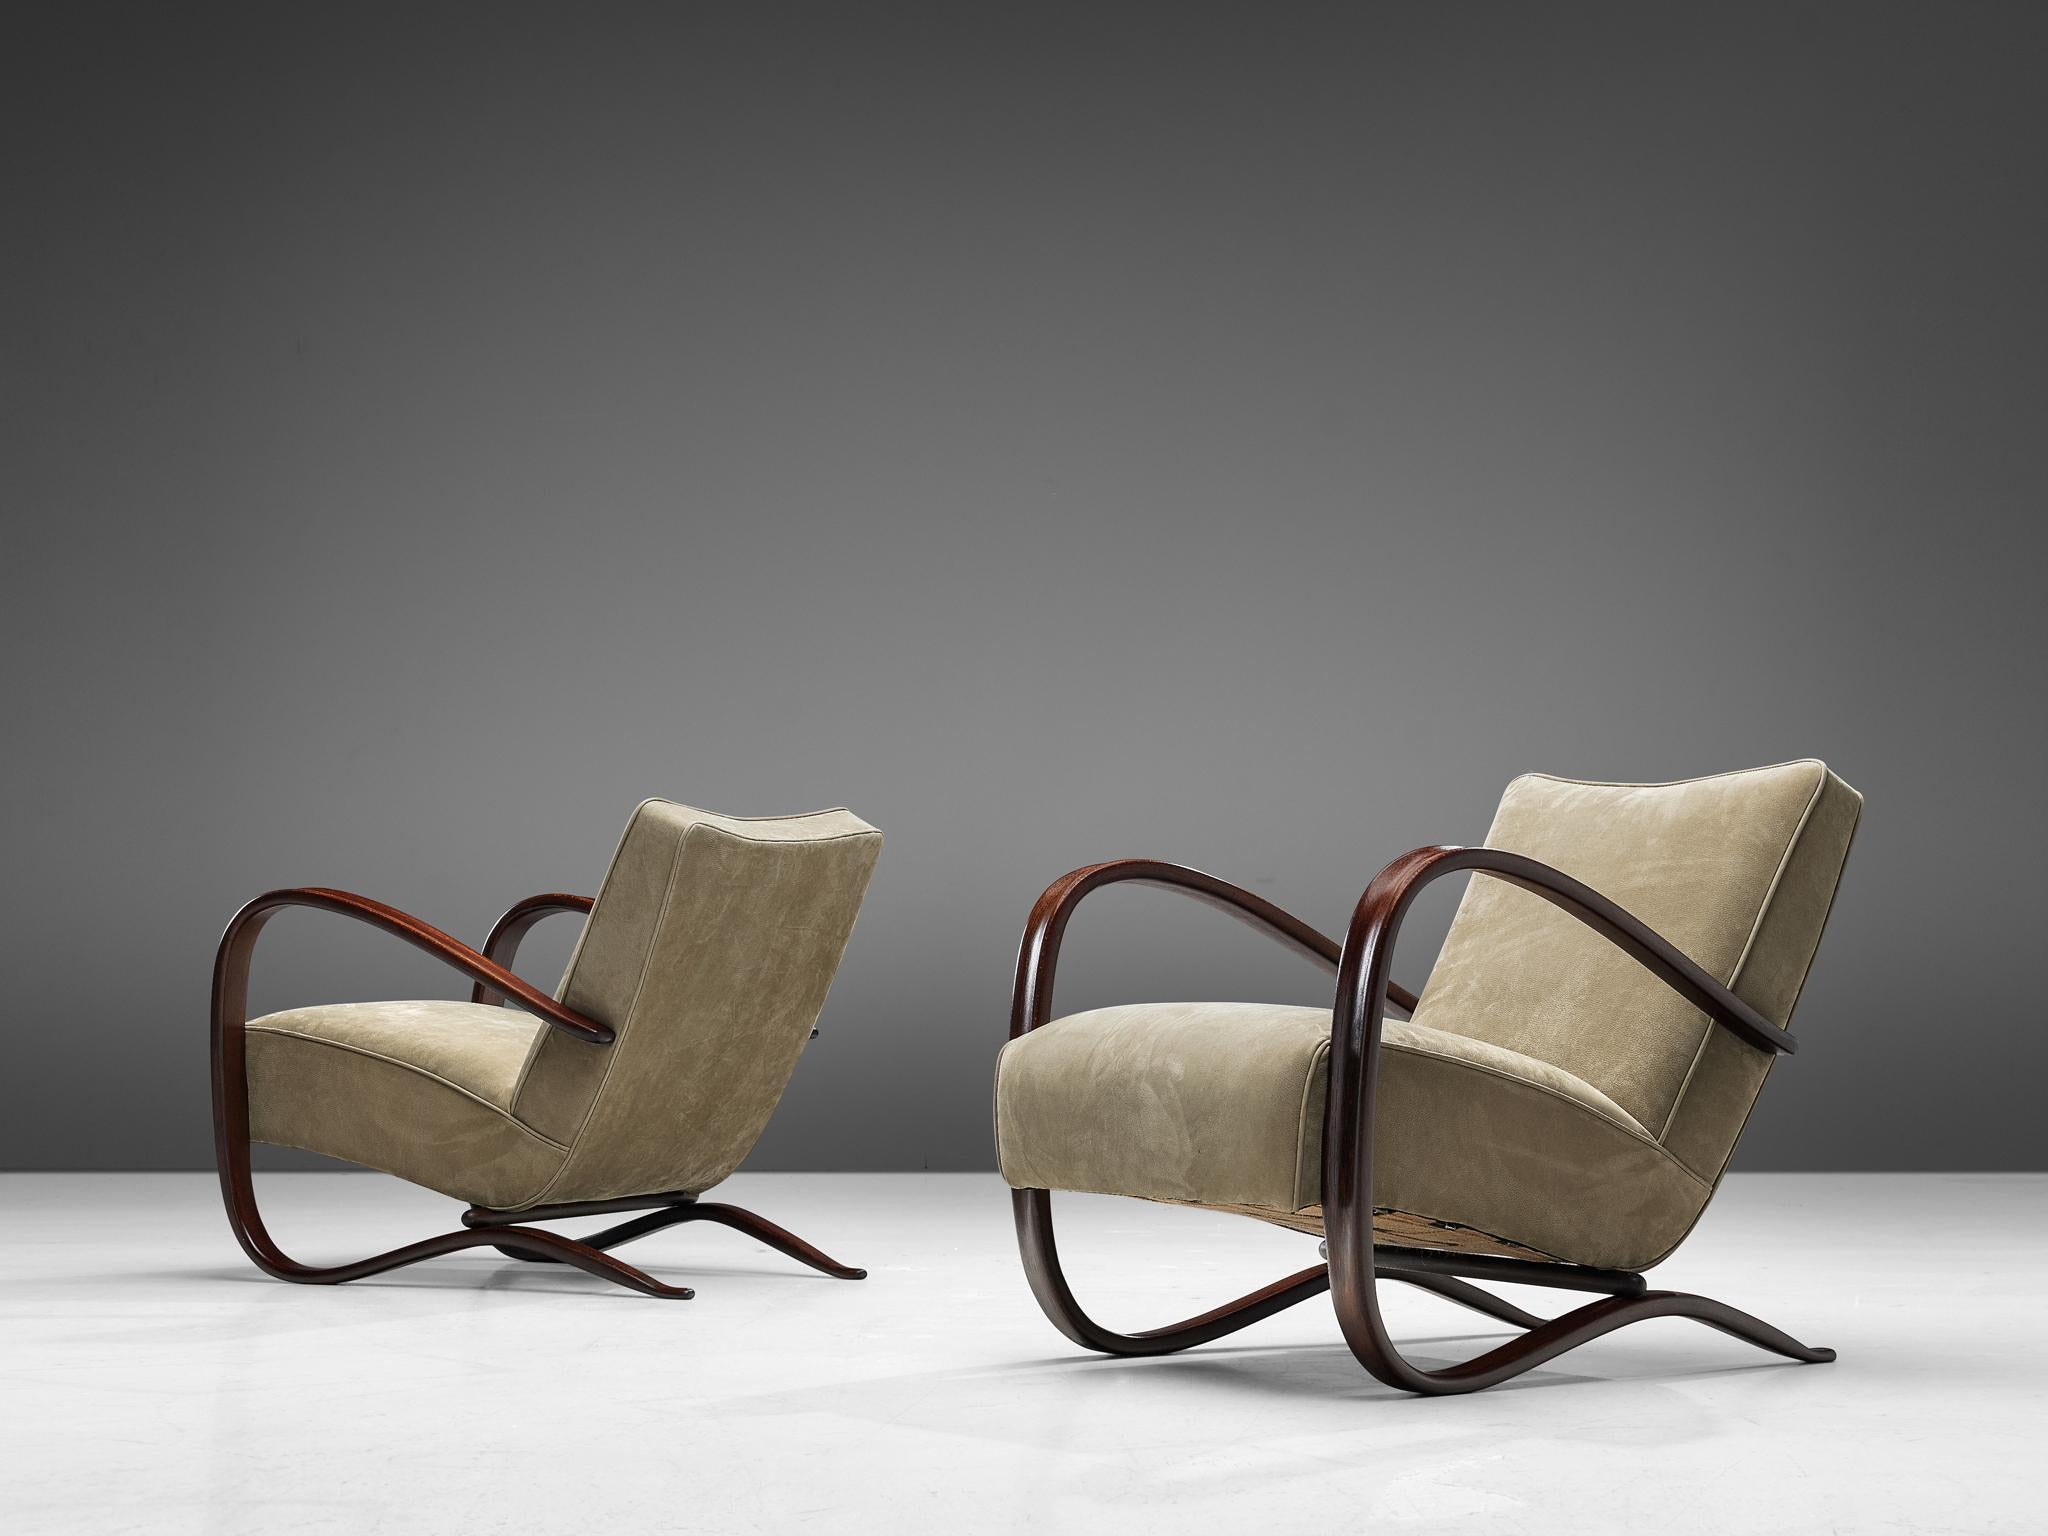 Jindrich Halabala, lounge chairs, in beech and leather, Czech Republic, 1930s.

This extraordinary pair of Halabala chairs are upholstered in a high quality leather in our upholstery studio. These chairs have a very dynamic appearance. Beautifully